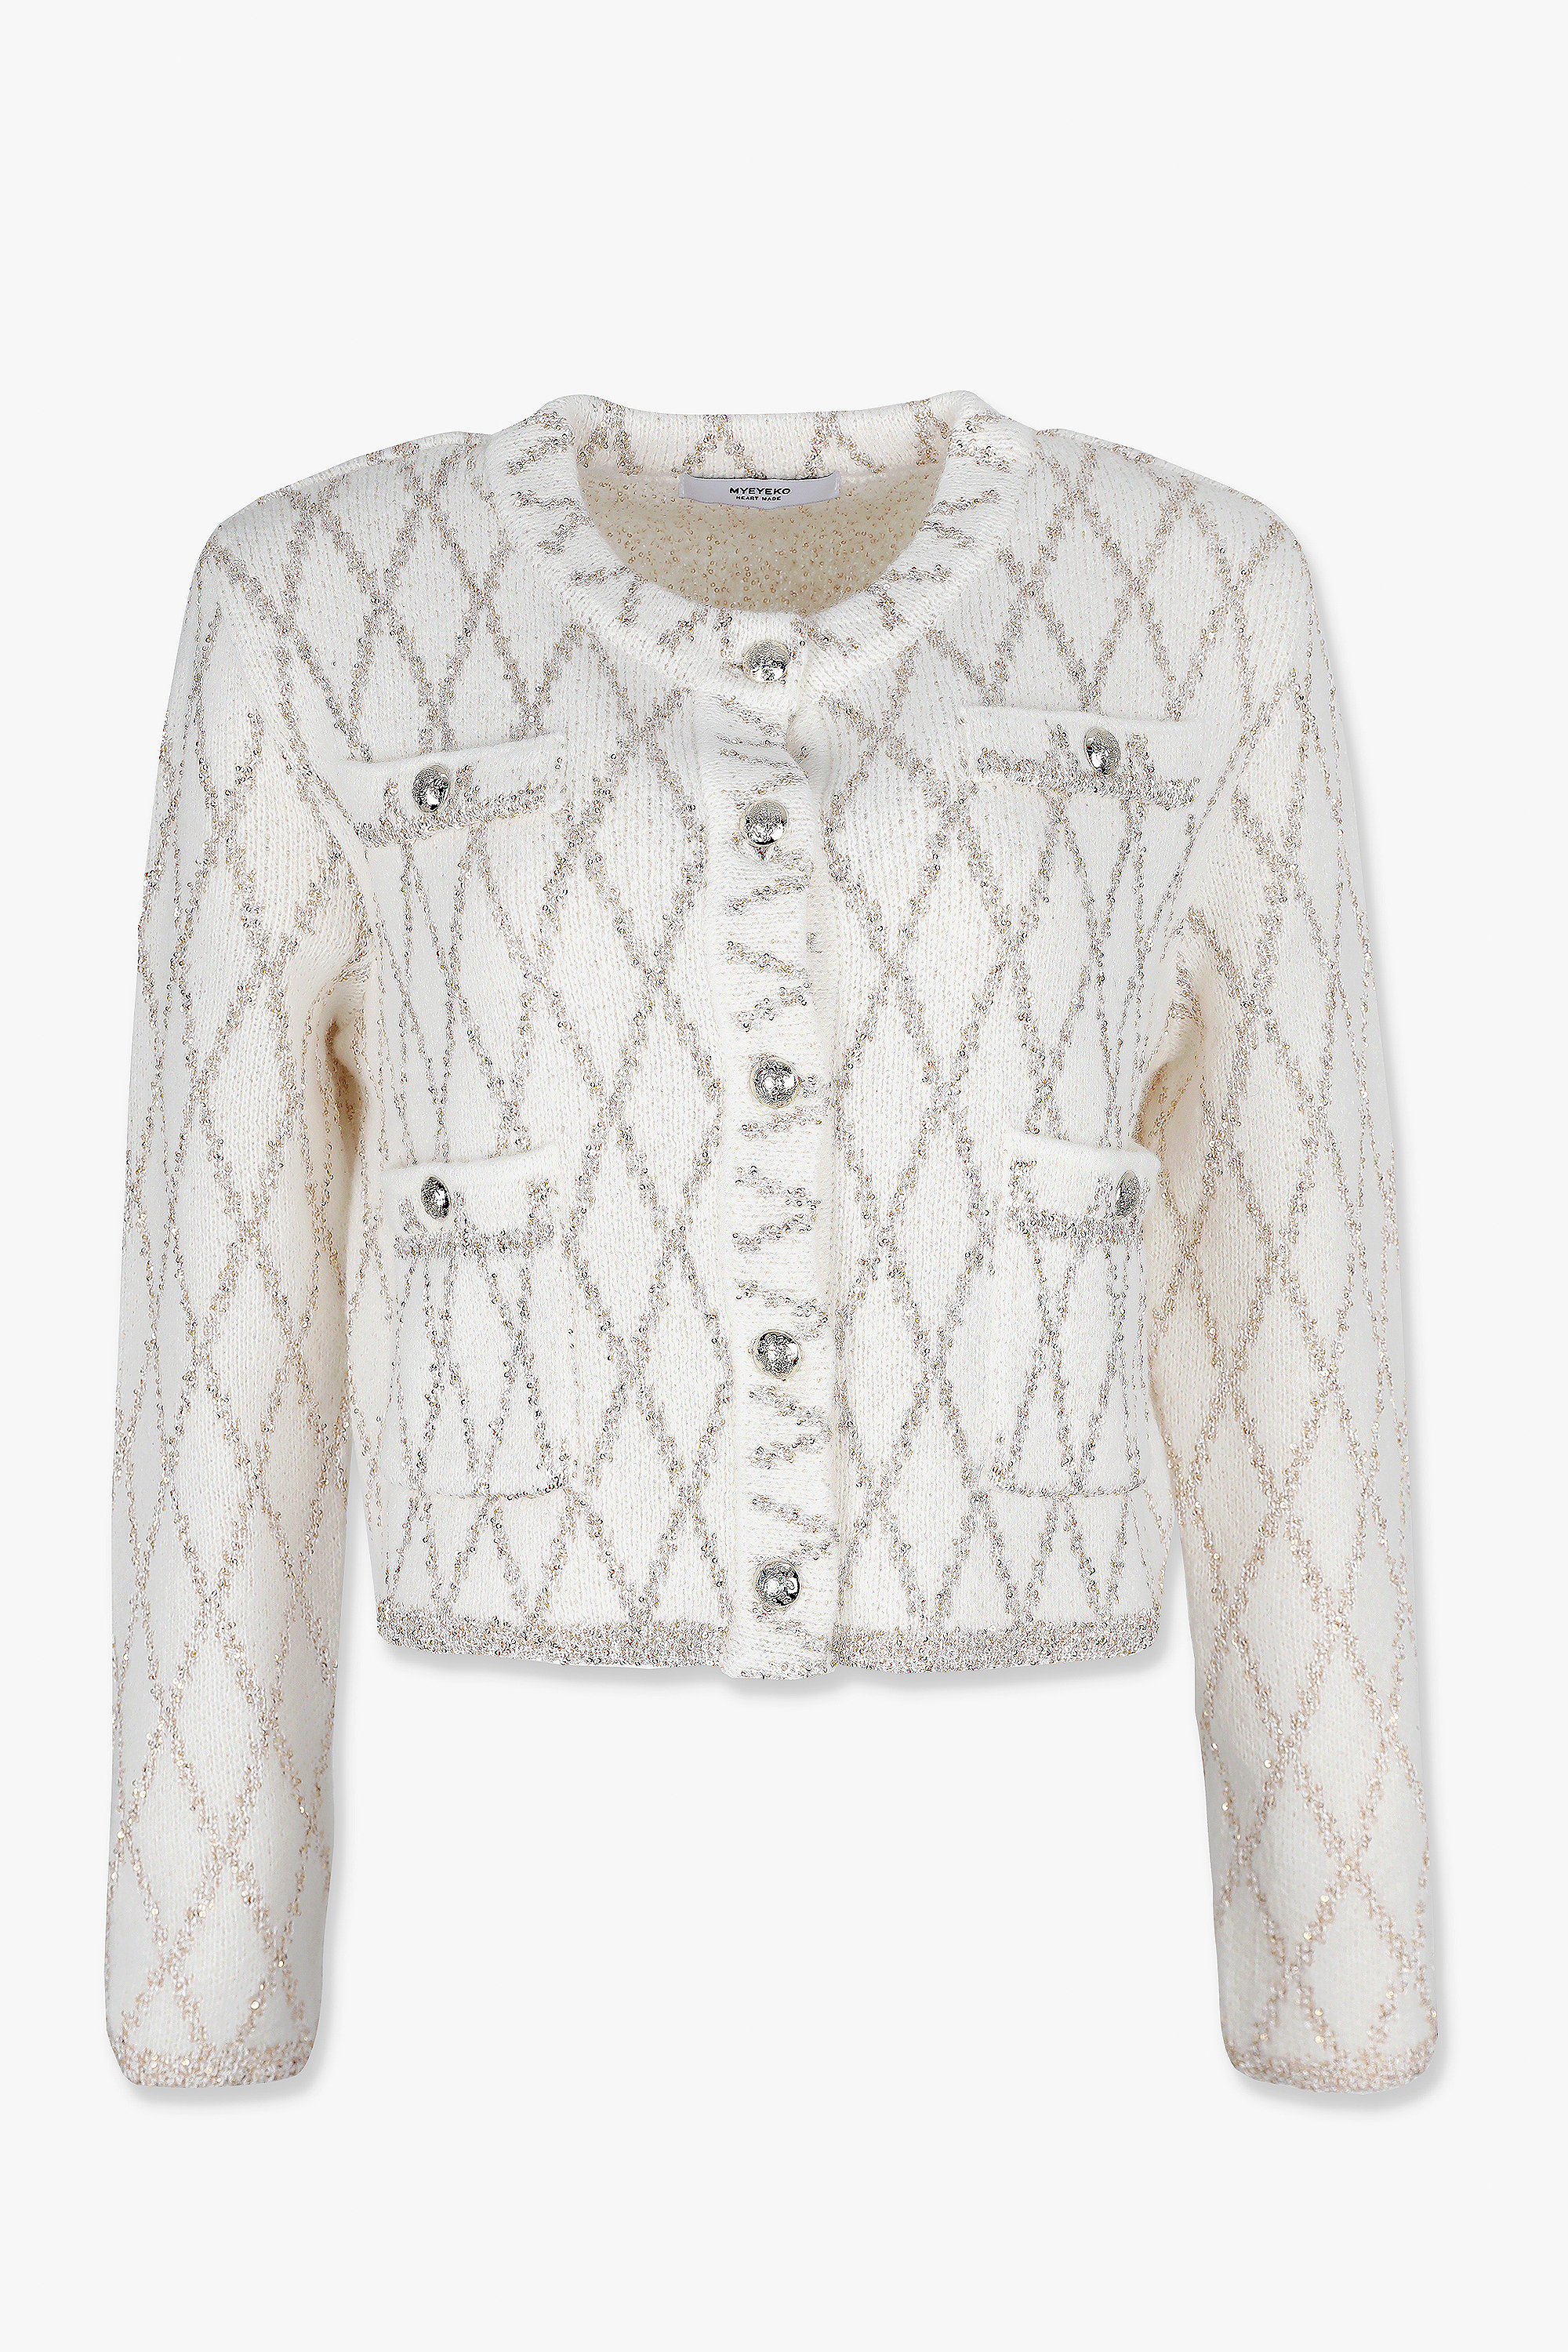 HIGH QUALITY LINE - MYEYEKO 23 SPRING COLLECTION / SEQUIN DIA KNIT JACKET (IVORY)